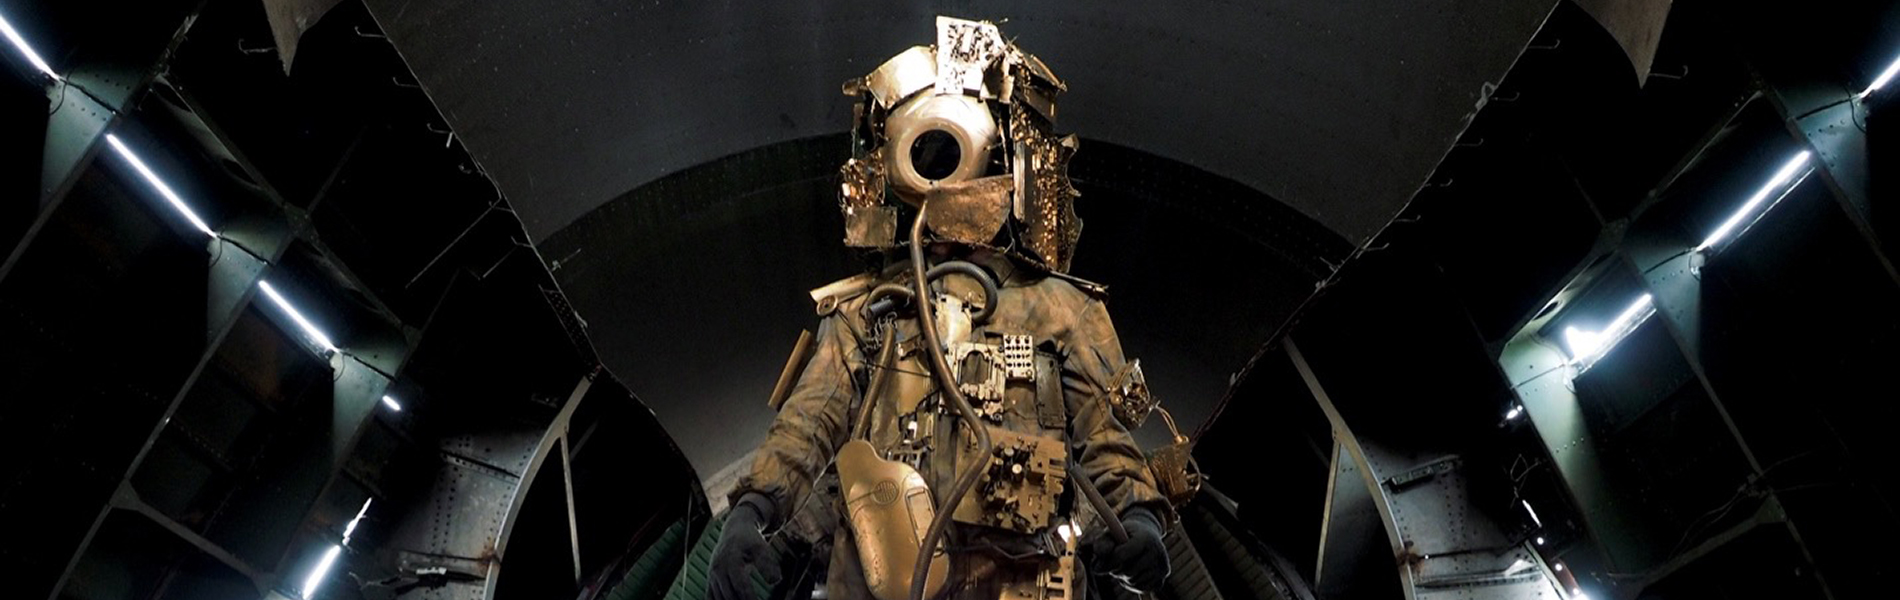 A spacewalker in a golden suit plastered with electronic circuits and other digital debris